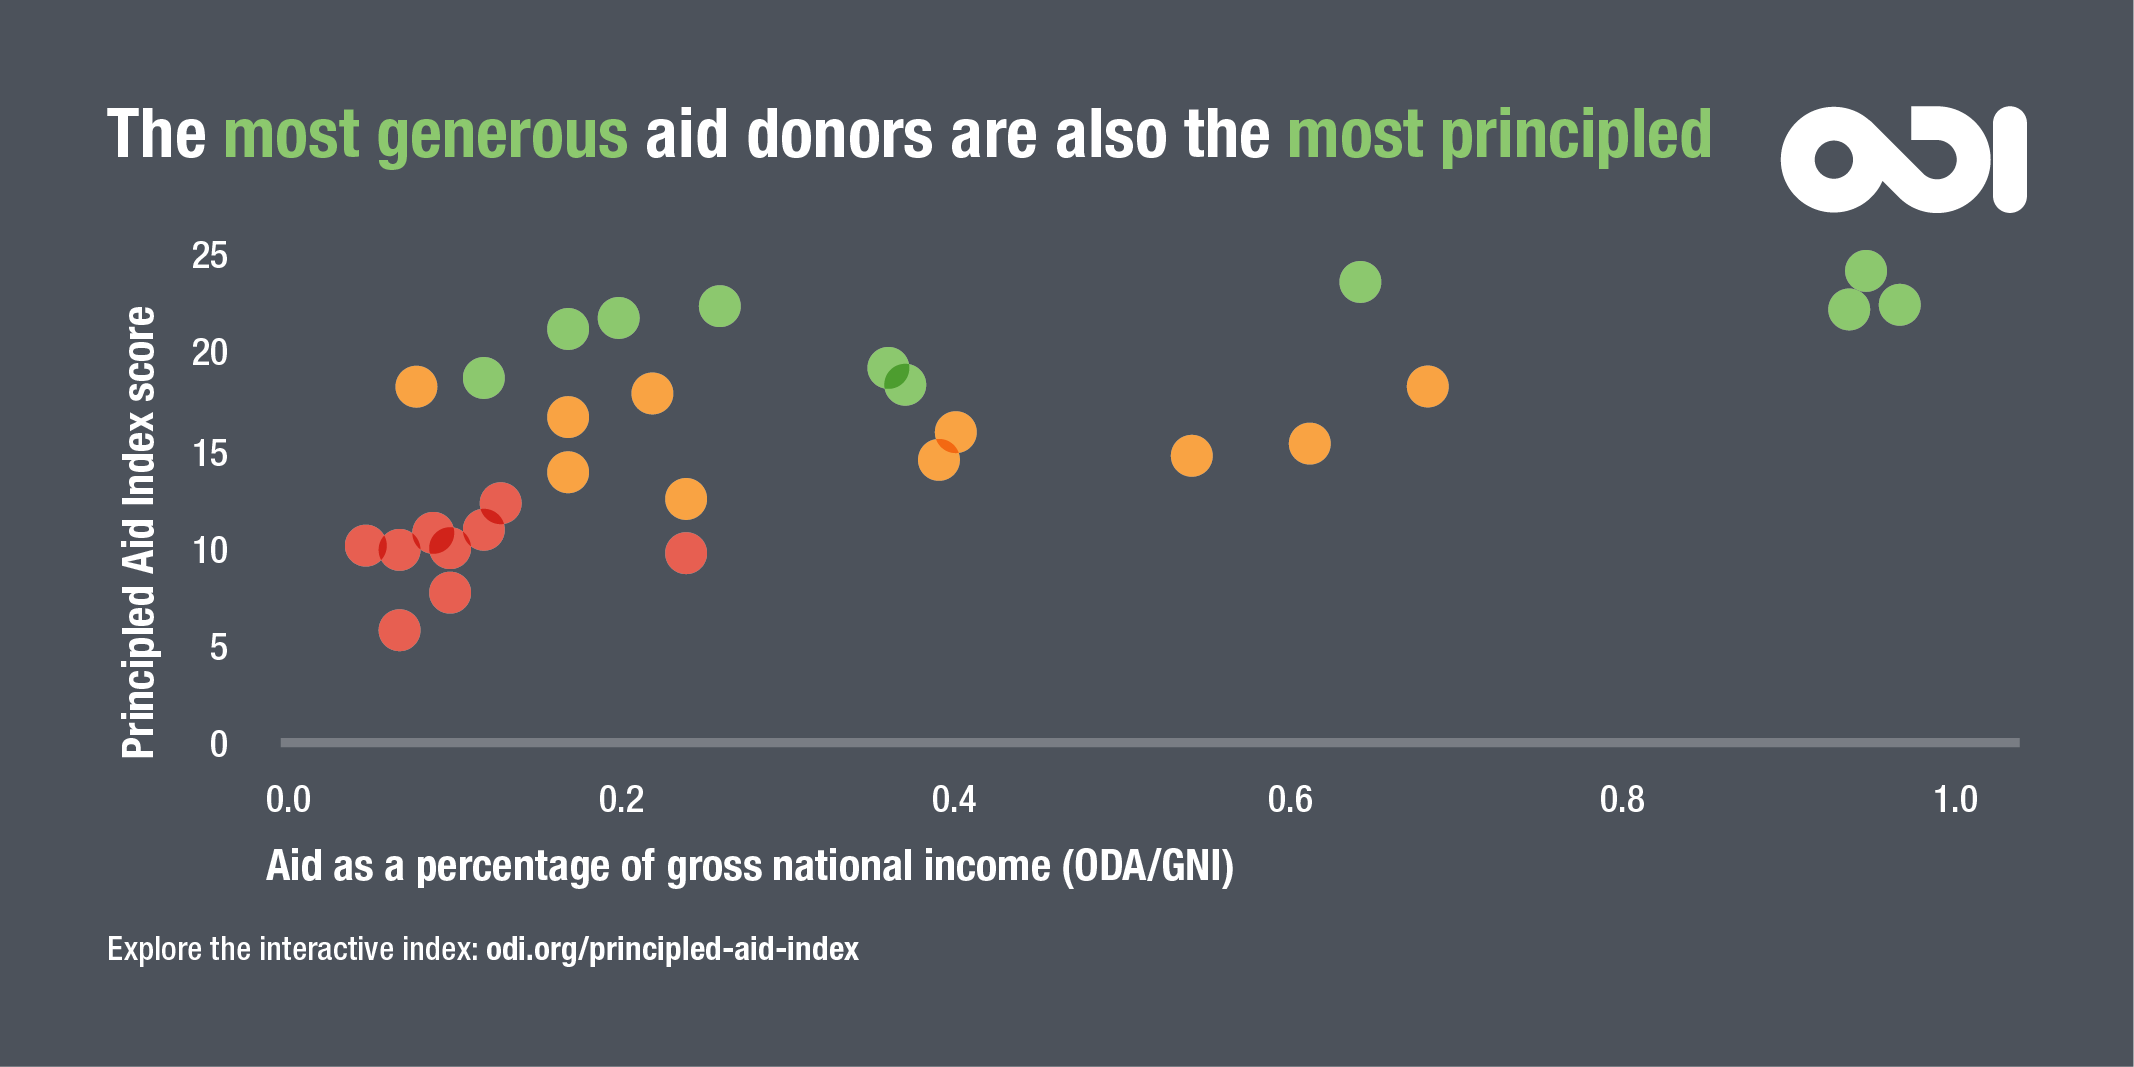 The most generous donors also tend to be most principled